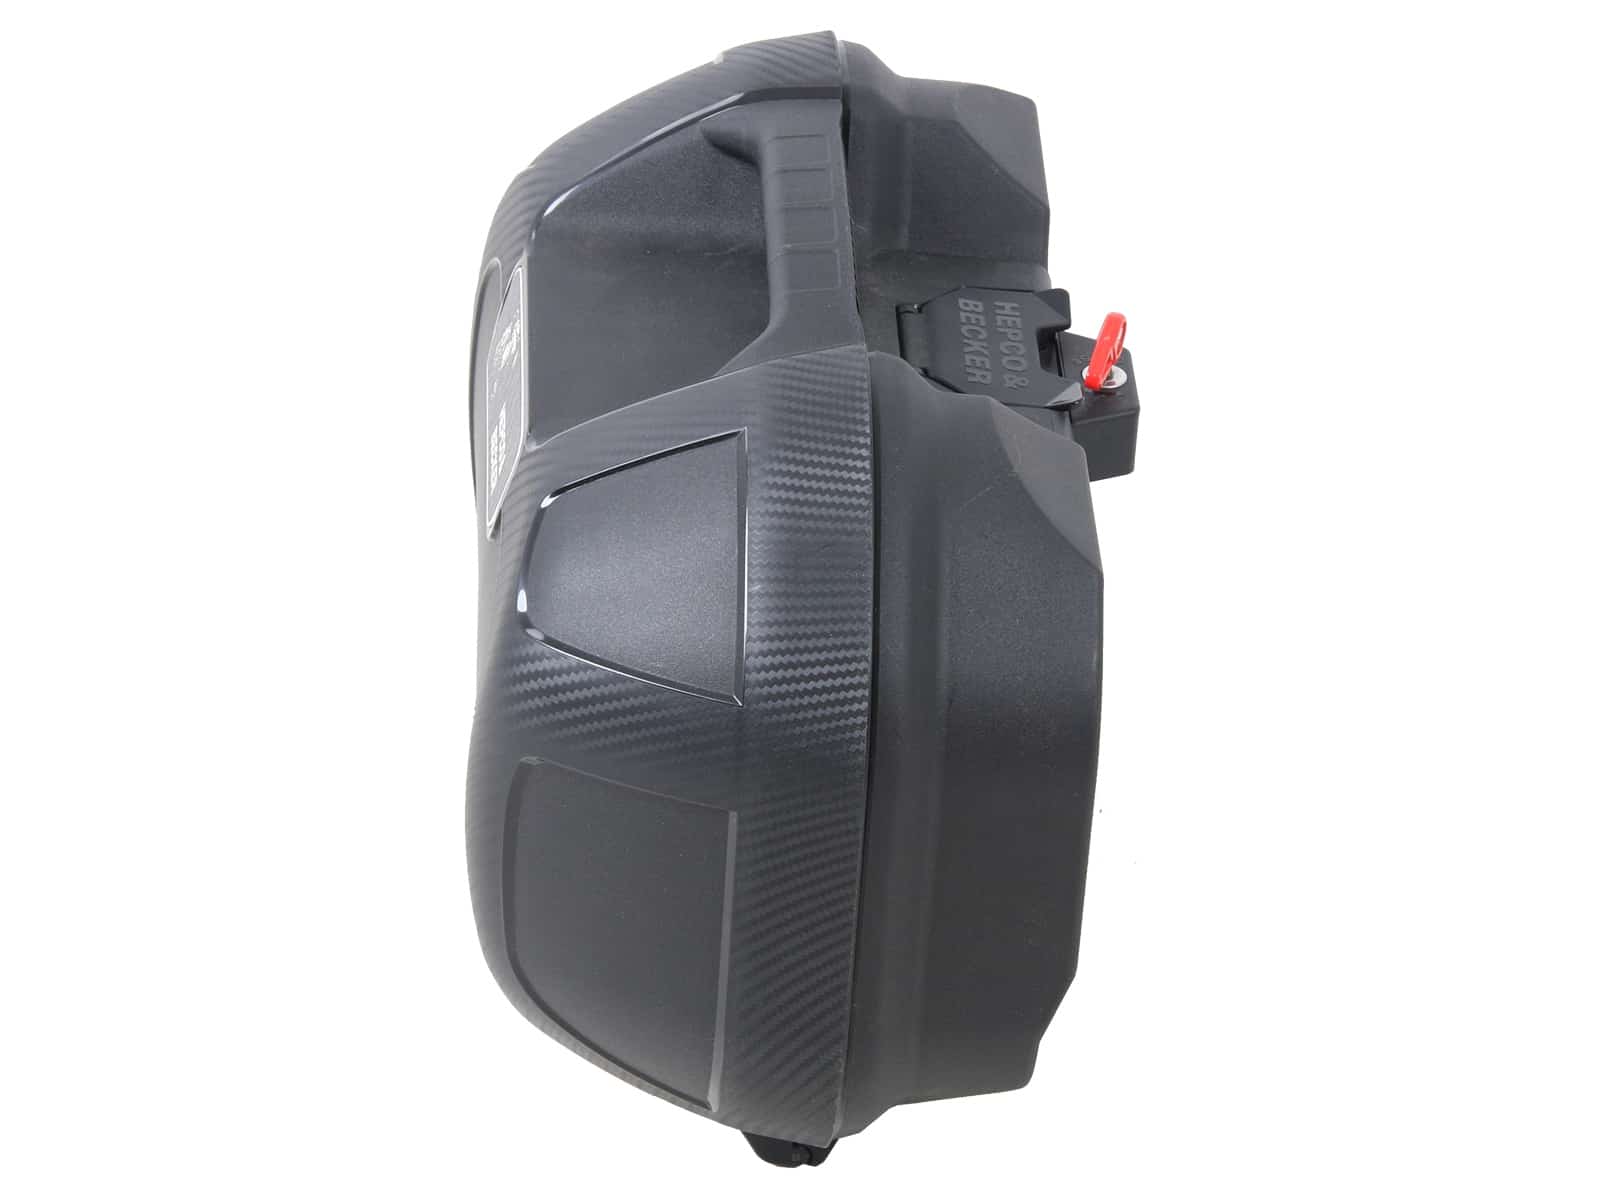 Orbit side case for C-Bow - 1 side only